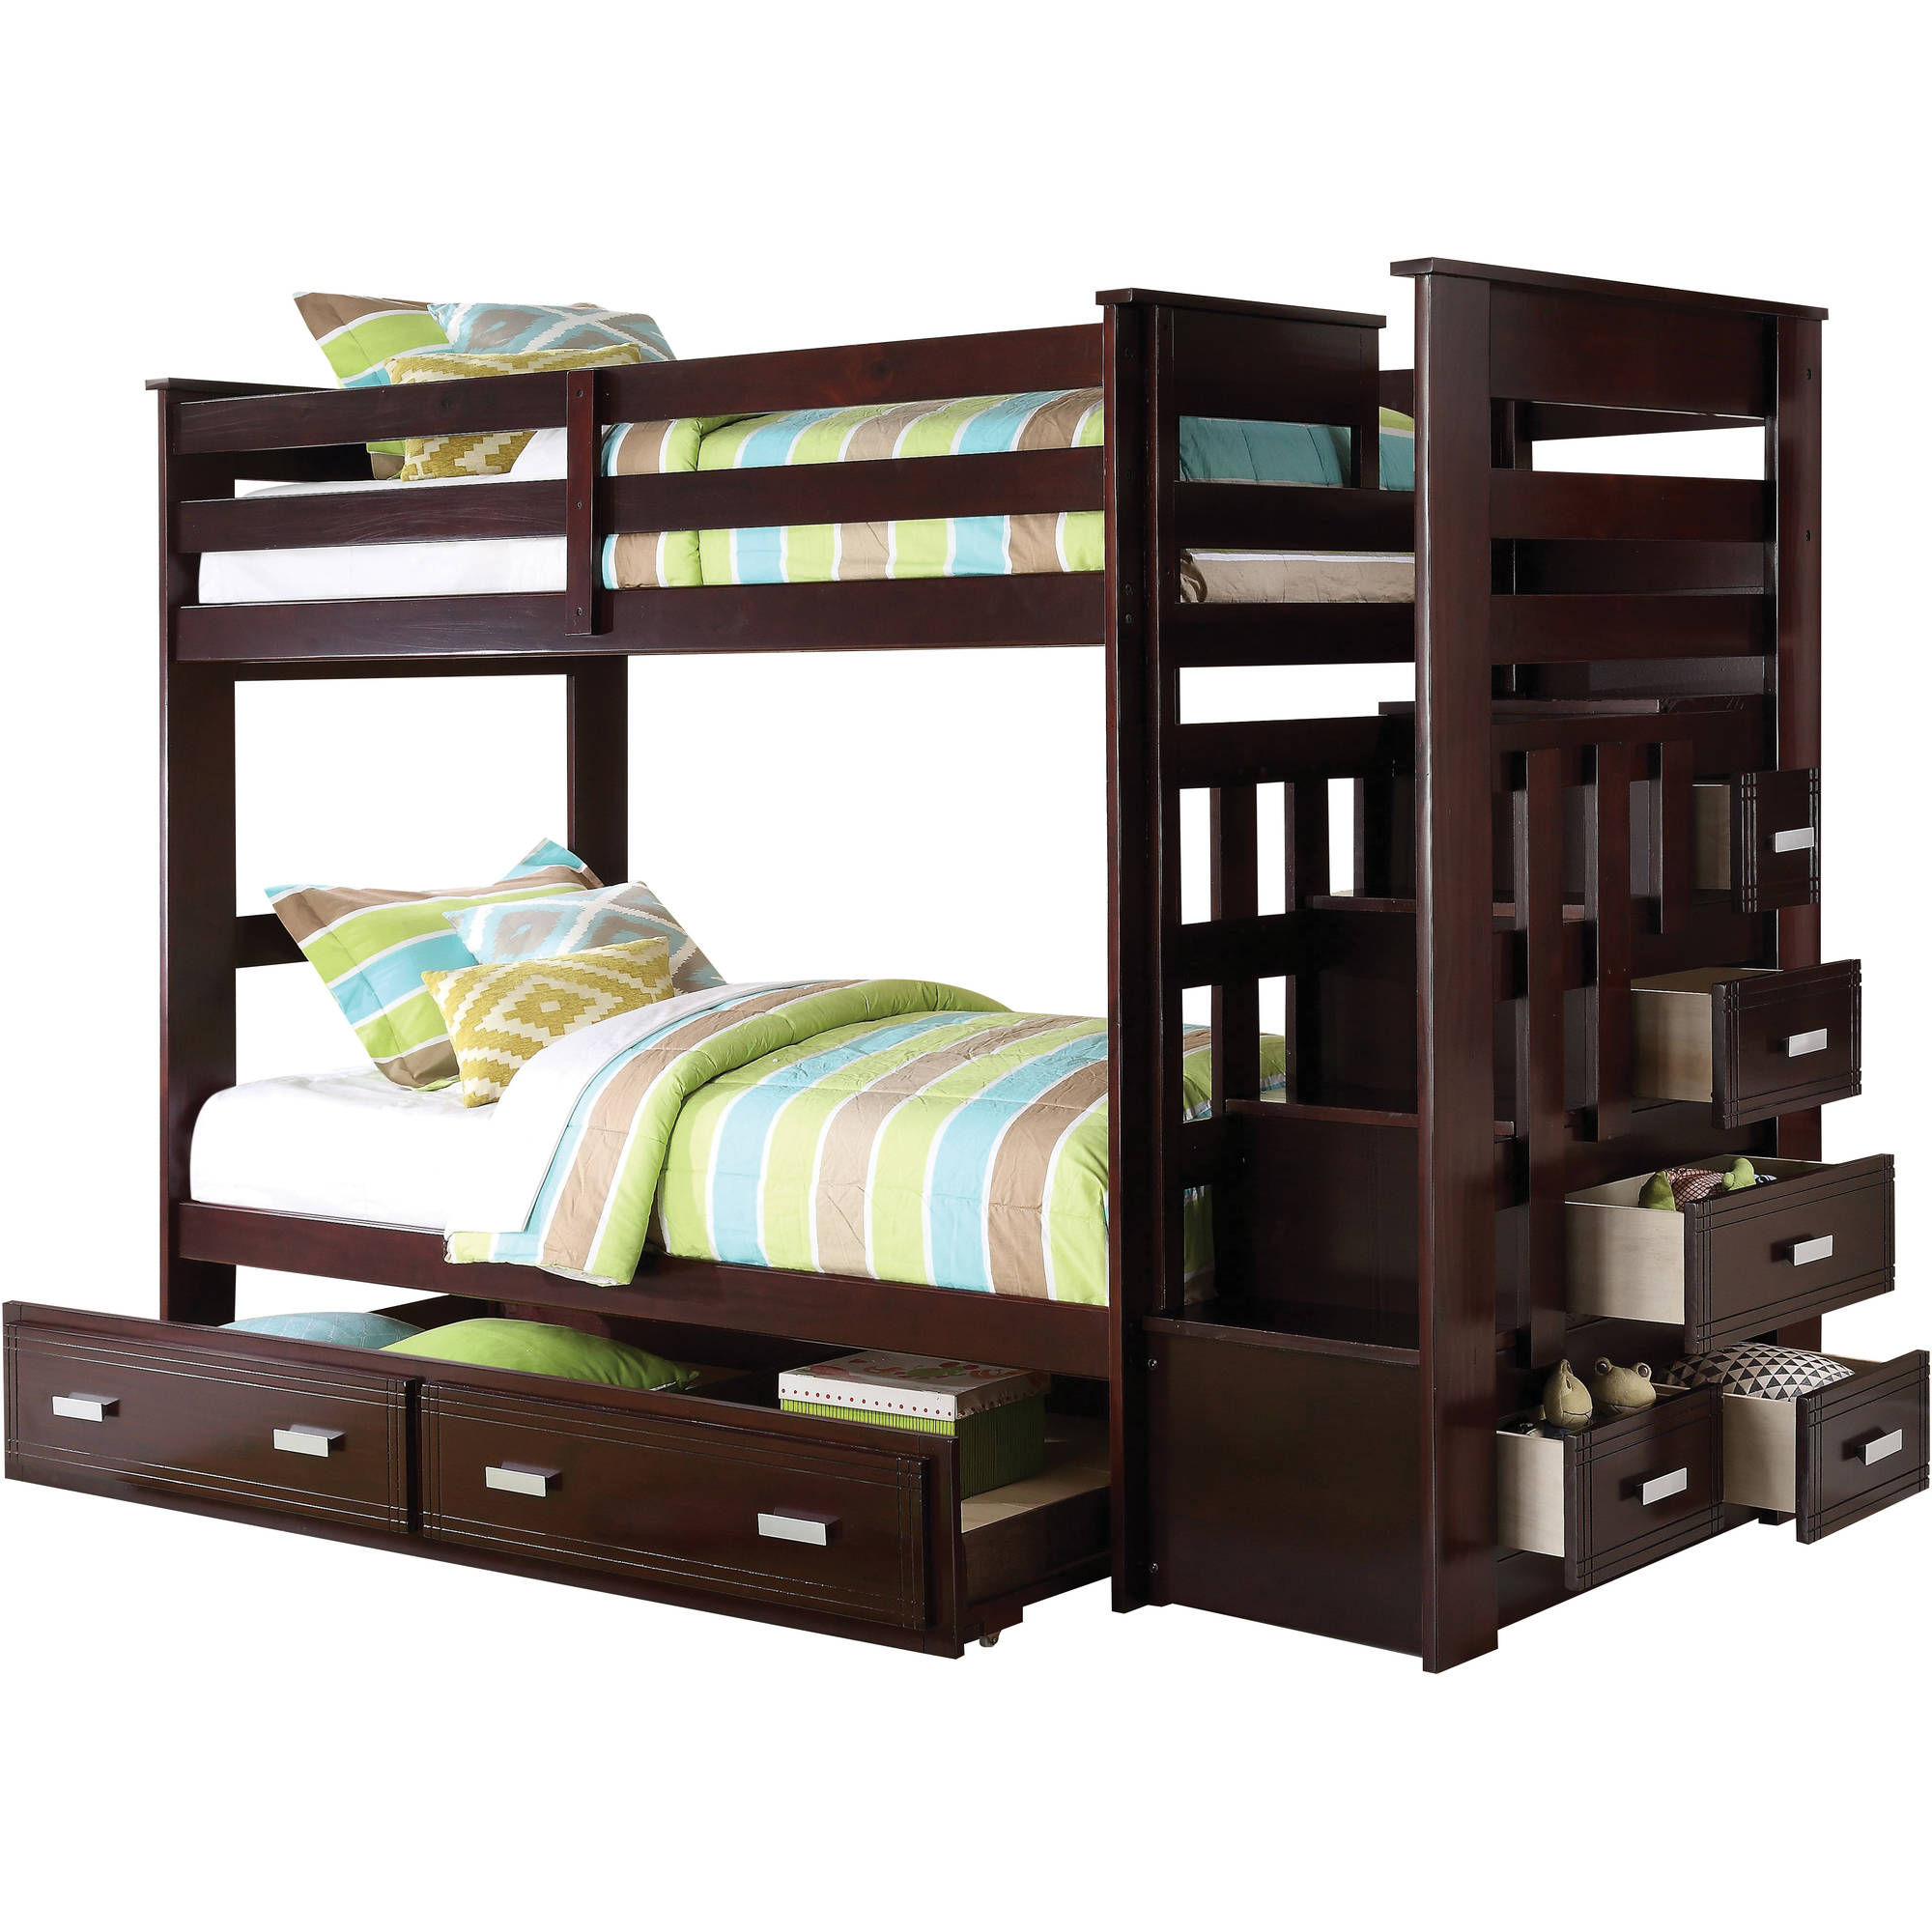 Acme Furniture Allentown Twin Over Twin Wood Bunk Bed with Storage, Espresso - image 3 of 7